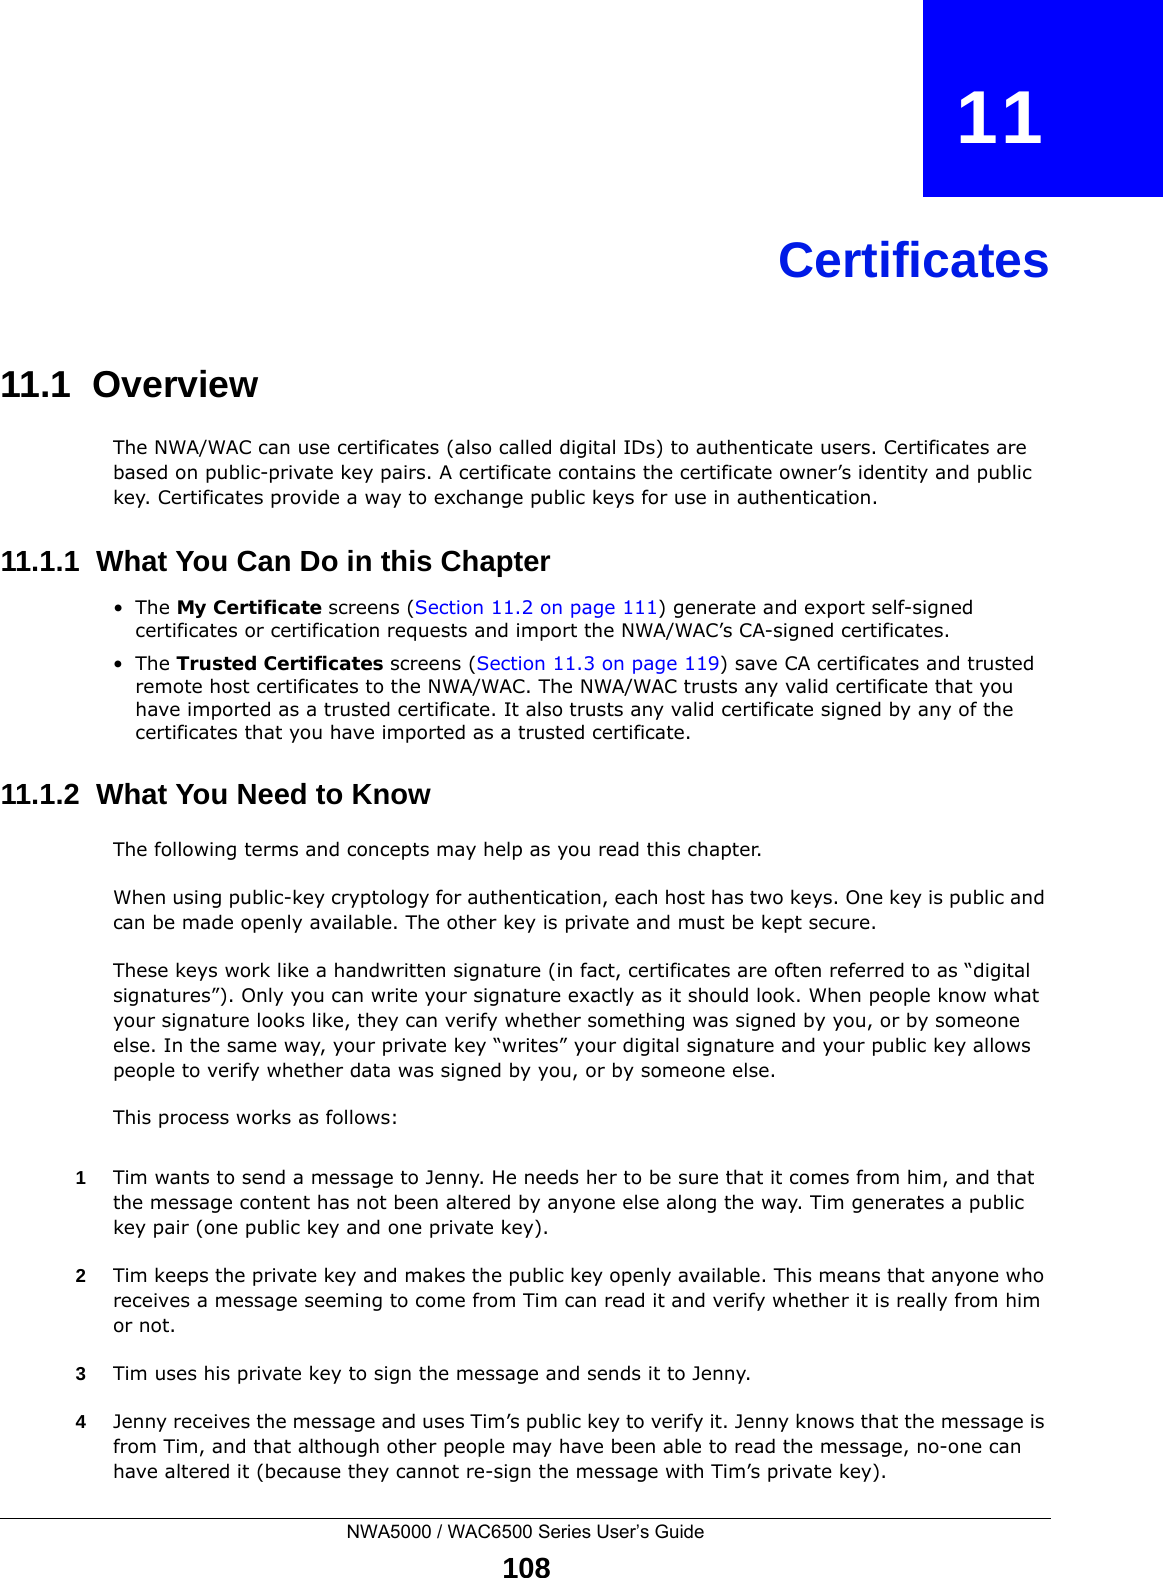 NWA5000 / WAC6500 Series User’s Guide108CHAPTER   11Certificates11.1  OverviewThe NWA/WAC can use certificates (also called digital IDs) to authenticate users. Certificates are based on public-private key pairs. A certificate contains the certificate owner’s identity and public key. Certificates provide a way to exchange public keys for use in authentication. 11.1.1  What You Can Do in this Chapter•The My Certificate screens (Section 11.2 on page 111) generate and export self-signed certificates or certification requests and import the NWA/WAC’s CA-signed certificates.•The Trusted Certificates screens (Section 11.3 on page 119) save CA certificates and trusted remote host certificates to the NWA/WAC. The NWA/WAC trusts any valid certificate that you have imported as a trusted certificate. It also trusts any valid certificate signed by any of the certificates that you have imported as a trusted certificate. 11.1.2  What You Need to KnowThe following terms and concepts may help as you read this chapter.When using public-key cryptology for authentication, each host has two keys. One key is public and can be made openly available. The other key is private and must be kept secure. These keys work like a handwritten signature (in fact, certificates are often referred to as “digital signatures”). Only you can write your signature exactly as it should look. When people know what your signature looks like, they can verify whether something was signed by you, or by someone else. In the same way, your private key “writes” your digital signature and your public key allows people to verify whether data was signed by you, or by someone else. This process works as follows:1Tim wants to send a message to Jenny. He needs her to be sure that it comes from him, and that the message content has not been altered by anyone else along the way. Tim generates a public key pair (one public key and one private key). 2Tim keeps the private key and makes the public key openly available. This means that anyone who receives a message seeming to come from Tim can read it and verify whether it is really from him or not. 3Tim uses his private key to sign the message and sends it to Jenny.4Jenny receives the message and uses Tim’s public key to verify it. Jenny knows that the message is from Tim, and that although other people may have been able to read the message, no-one can have altered it (because they cannot re-sign the message with Tim’s private key).